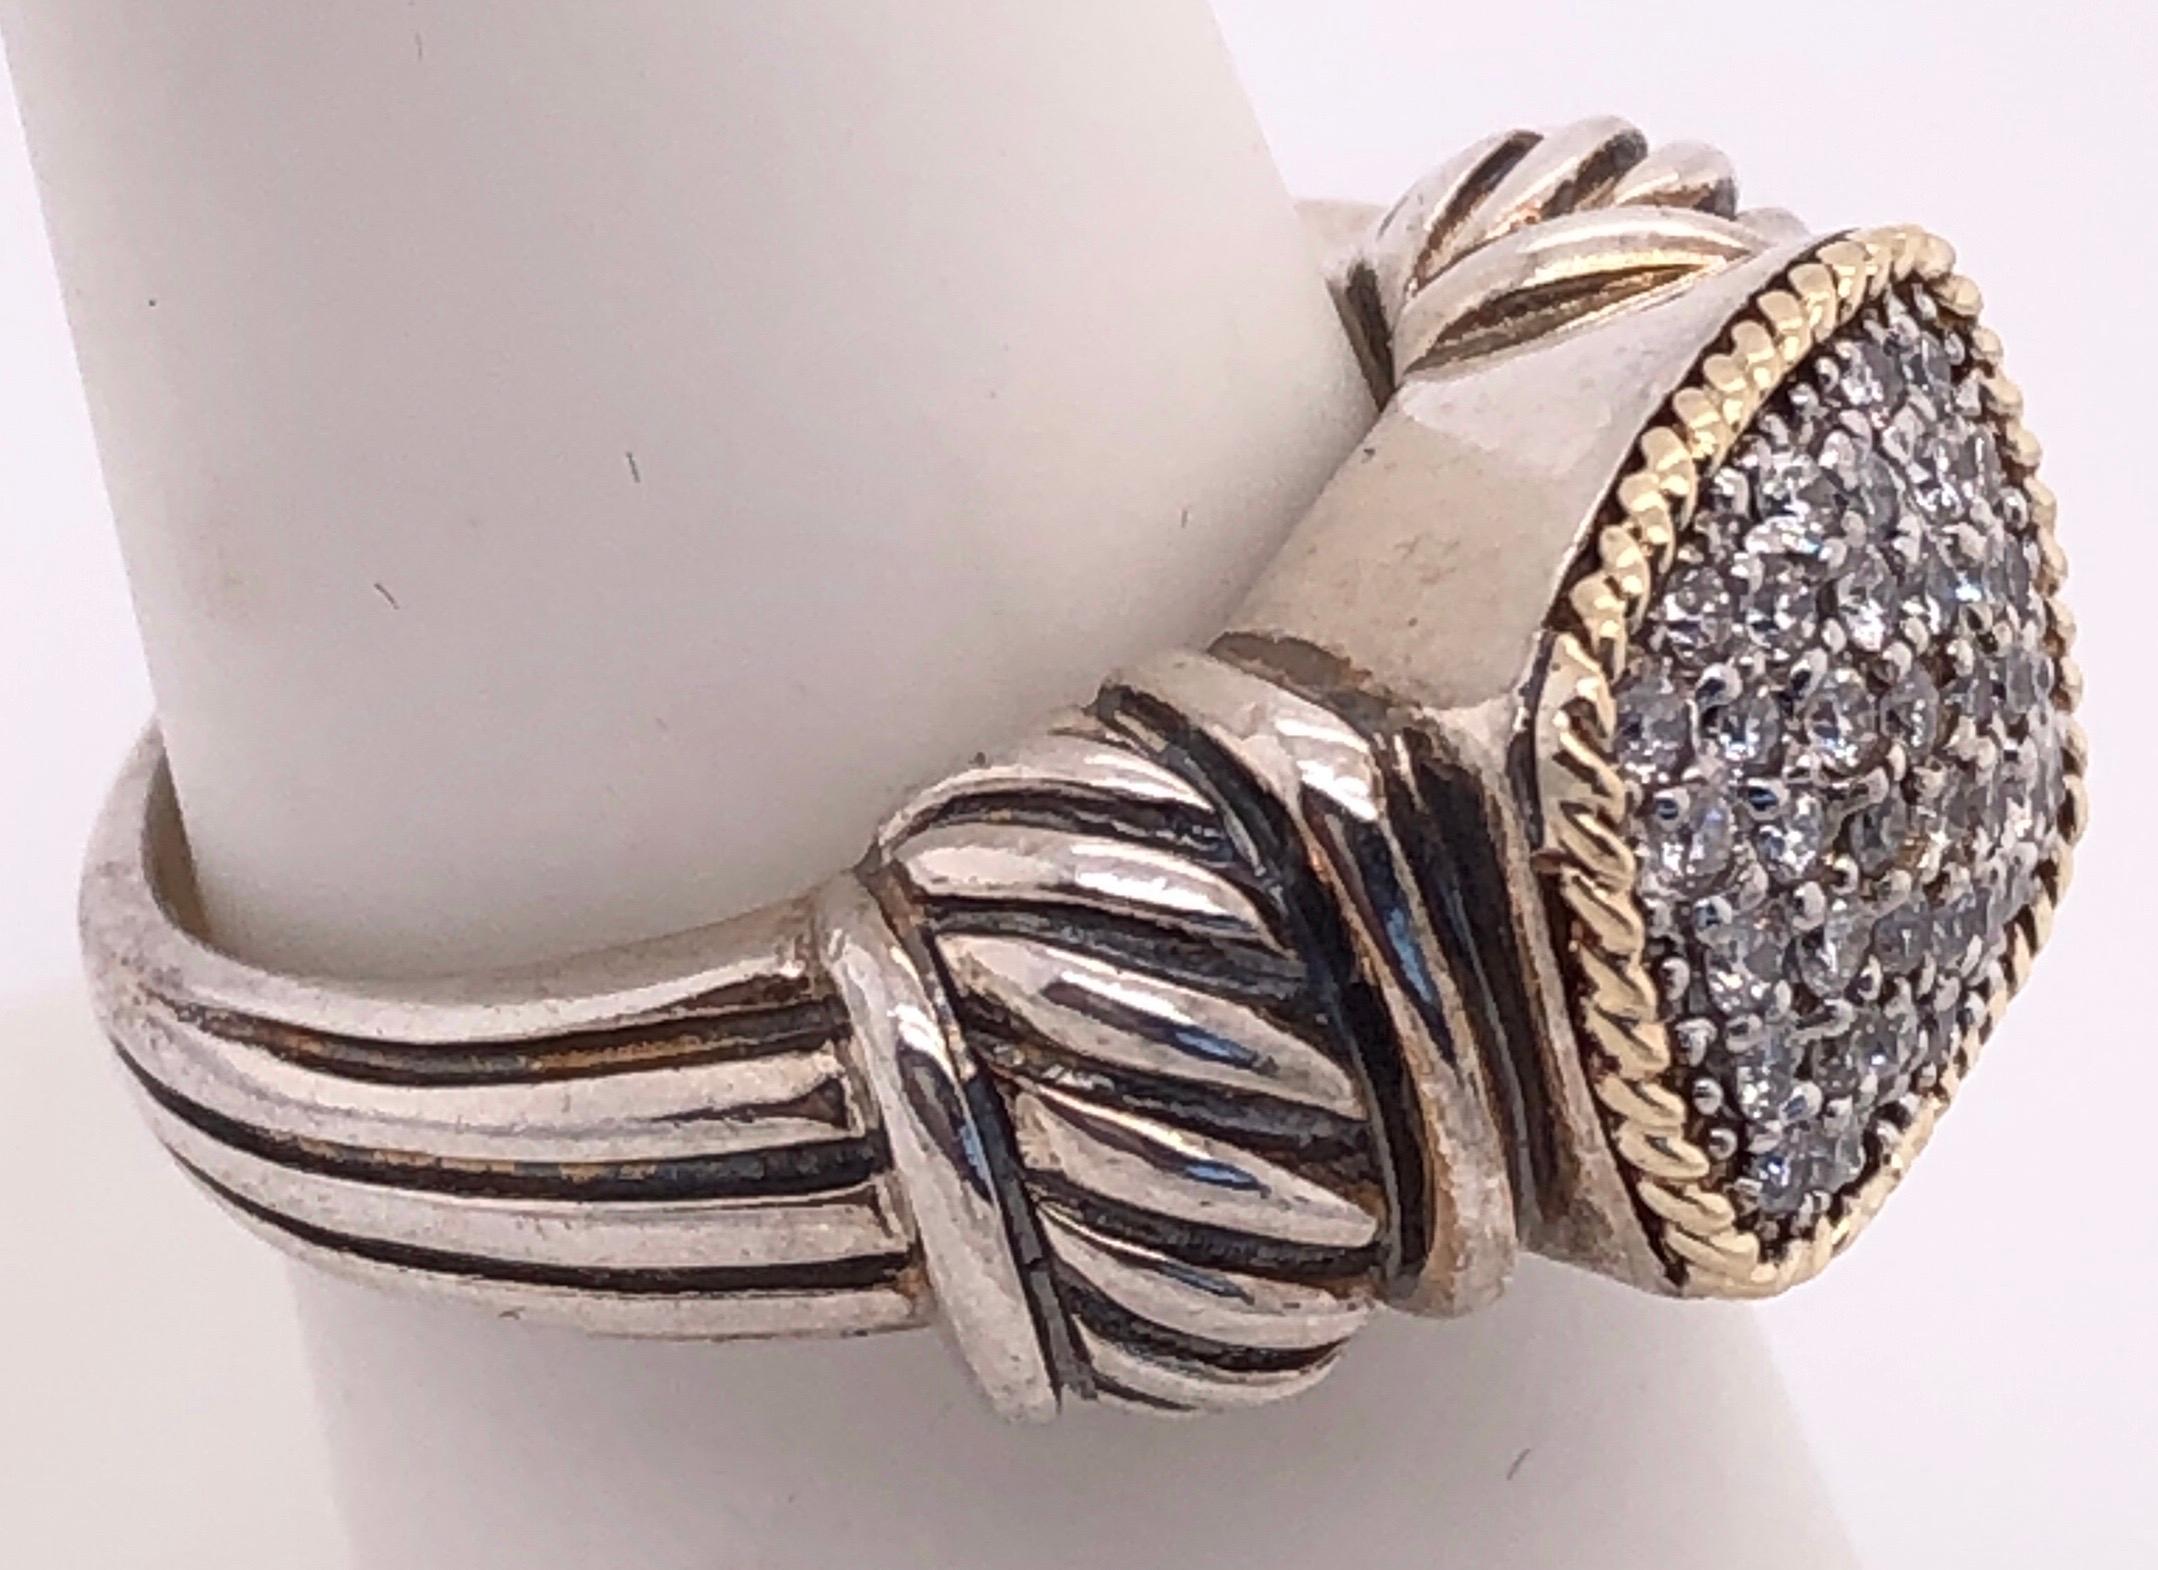 18 Kt Yellow Gold And Sterling Silver With Diamond Cluster Center Ring Size 7.25
1.00 total diamond weight.
8 grams total weight.
Stamped 925 and 18 Karat  
